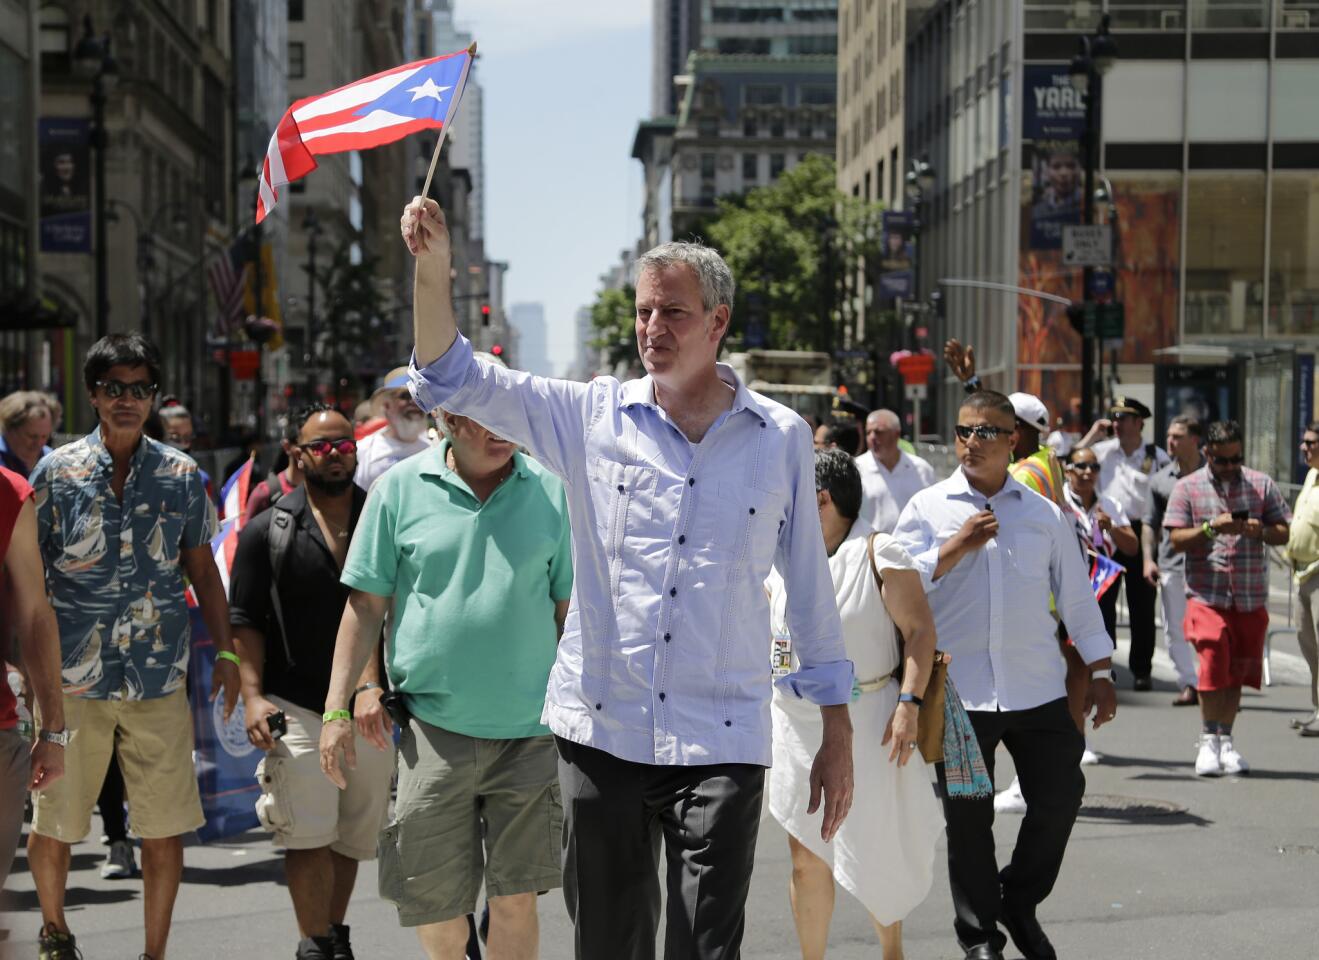 Puerto Rican Day Parade in New York